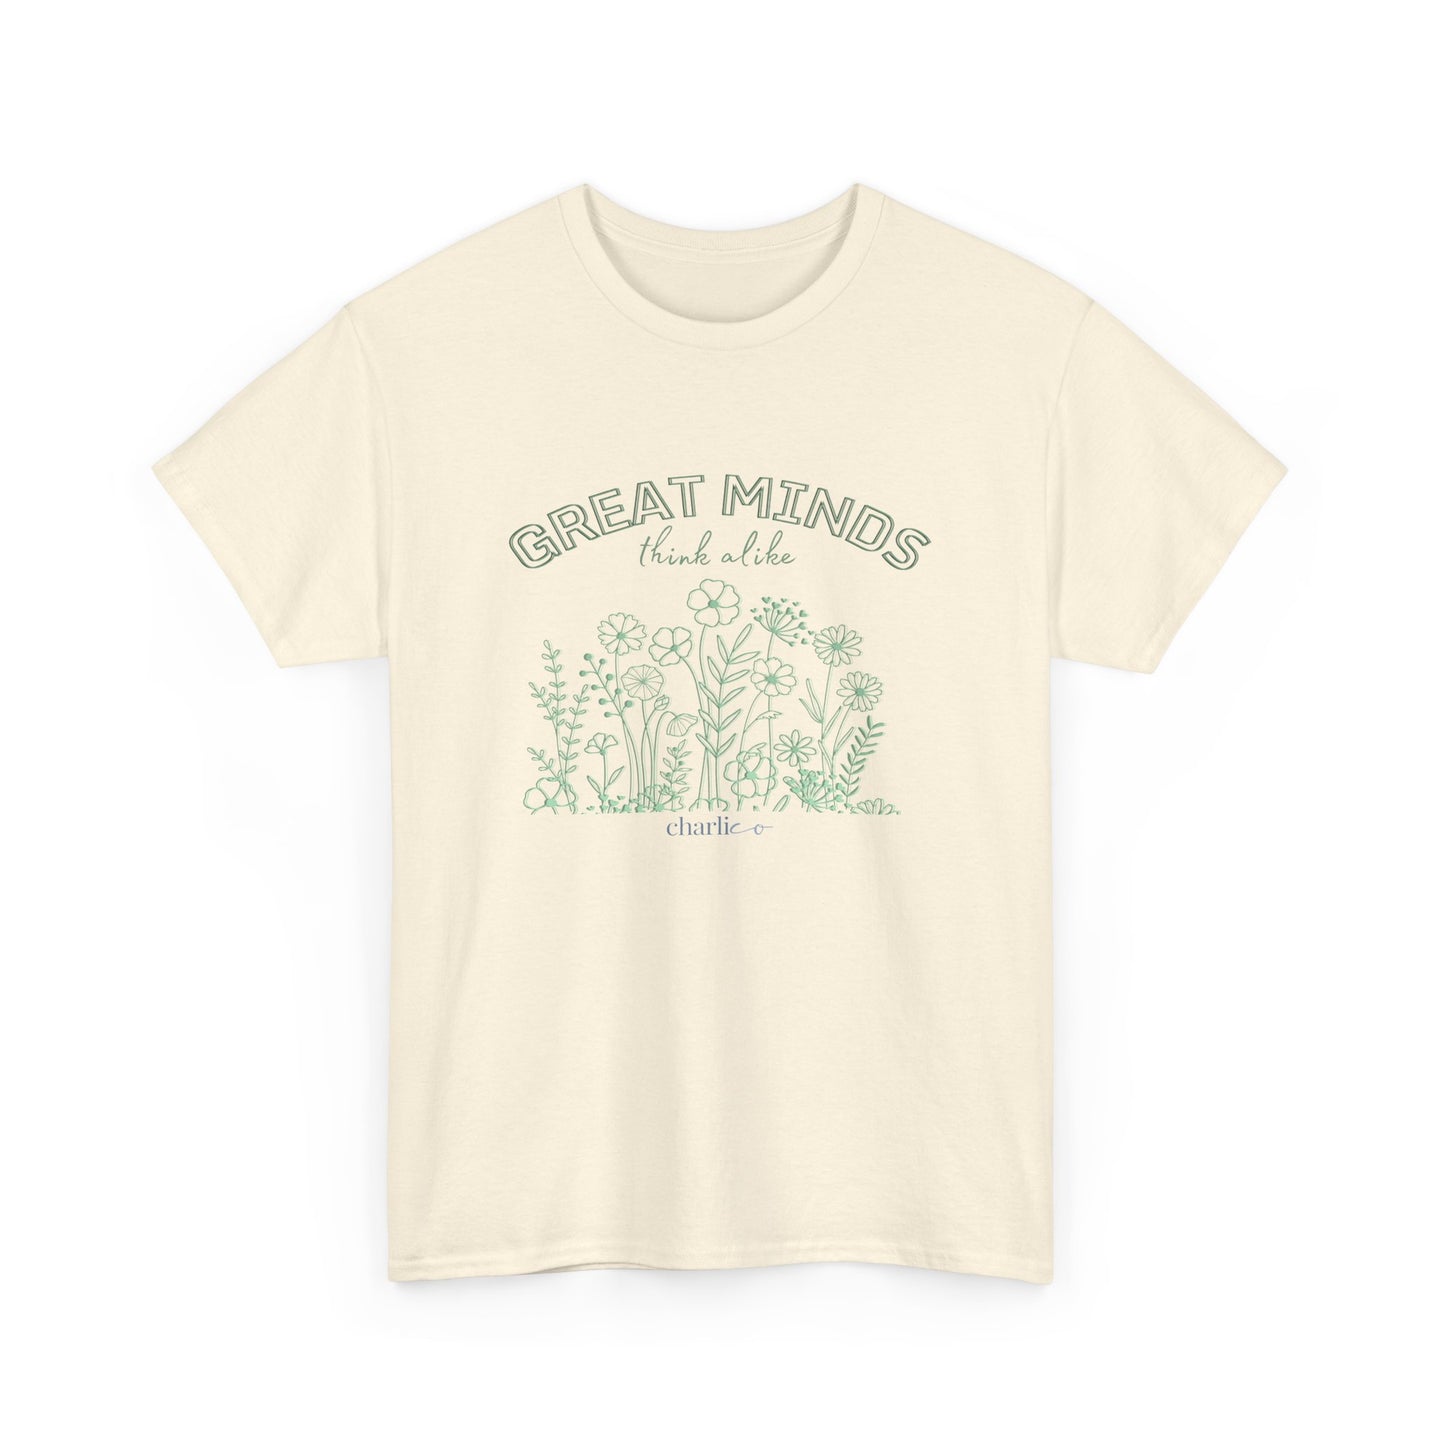 GREAT MINDS Unisex Printed Short-Sleeve T-Shirt for Adults